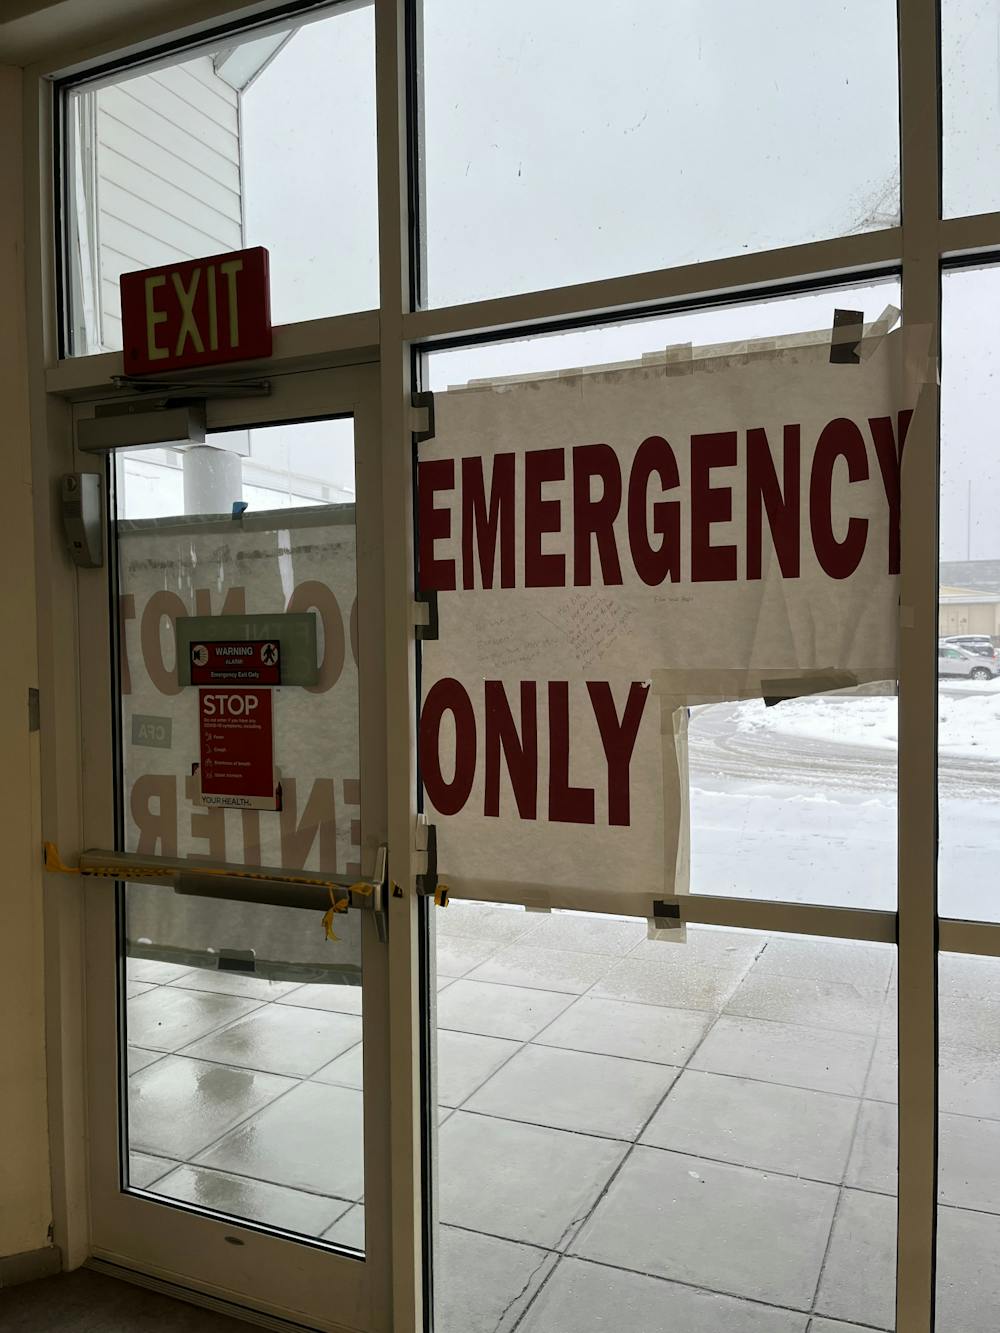 When students pass through the lower-level door, they now set off an emergency exit alarm.